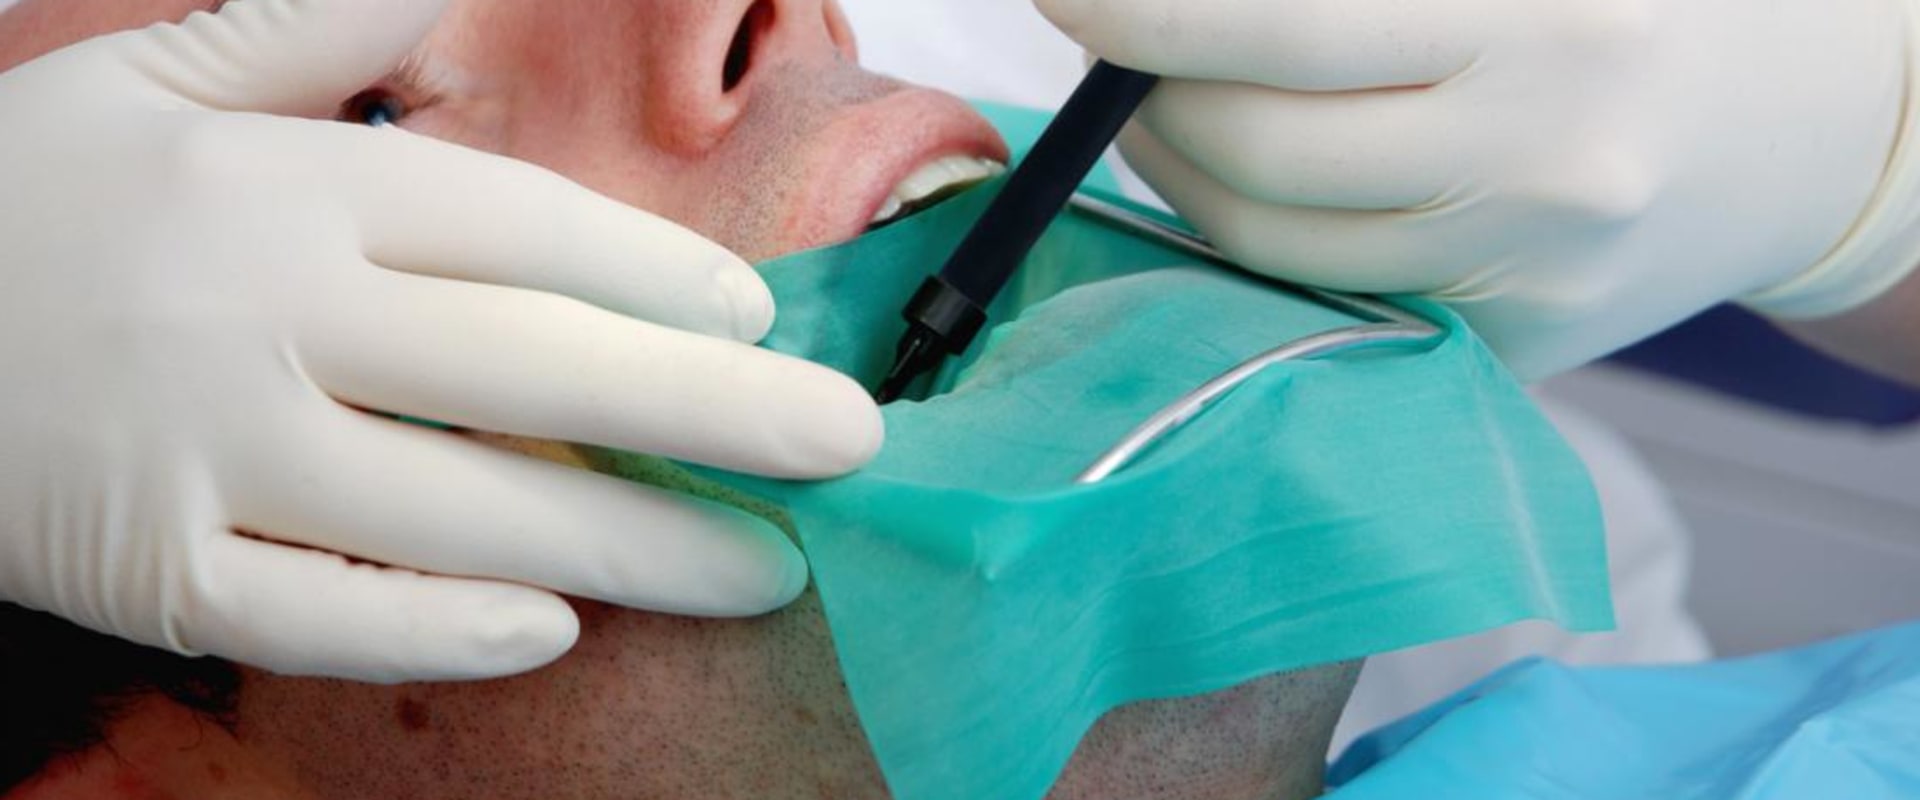 Root Canal Surgery: What You Need to Know